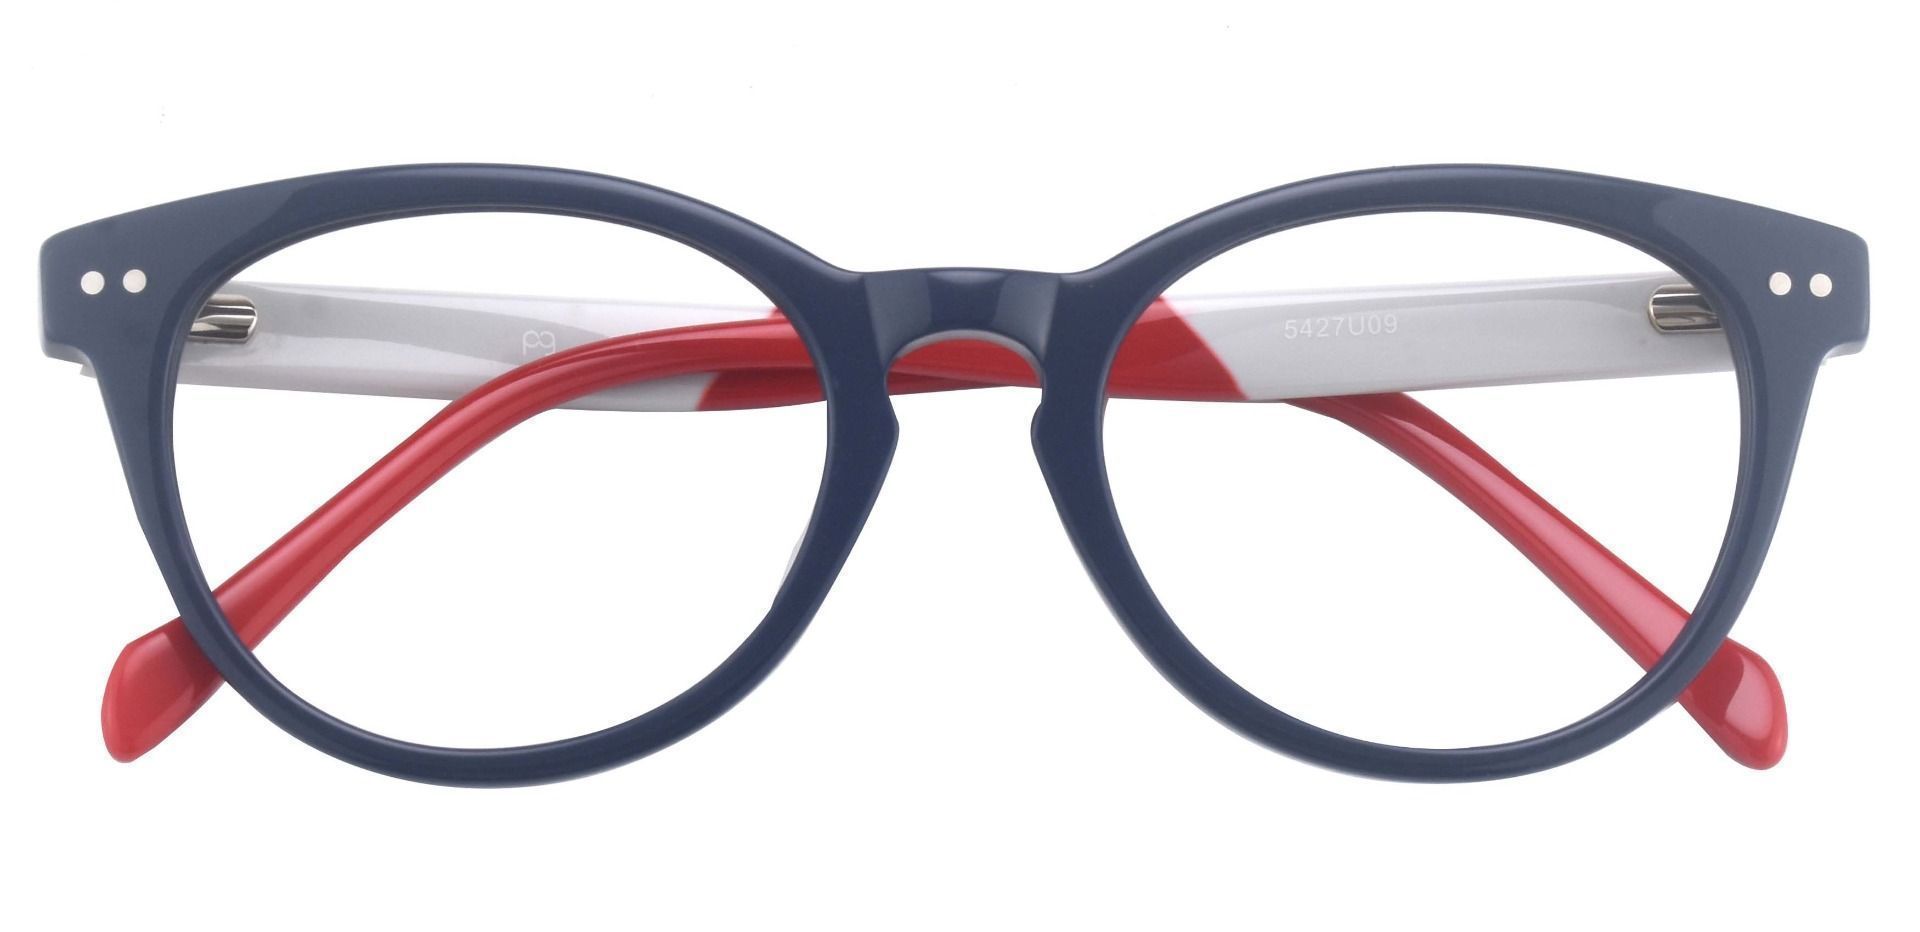 Revere Oval Prescription Glasses - The Frame Is Blue And Red